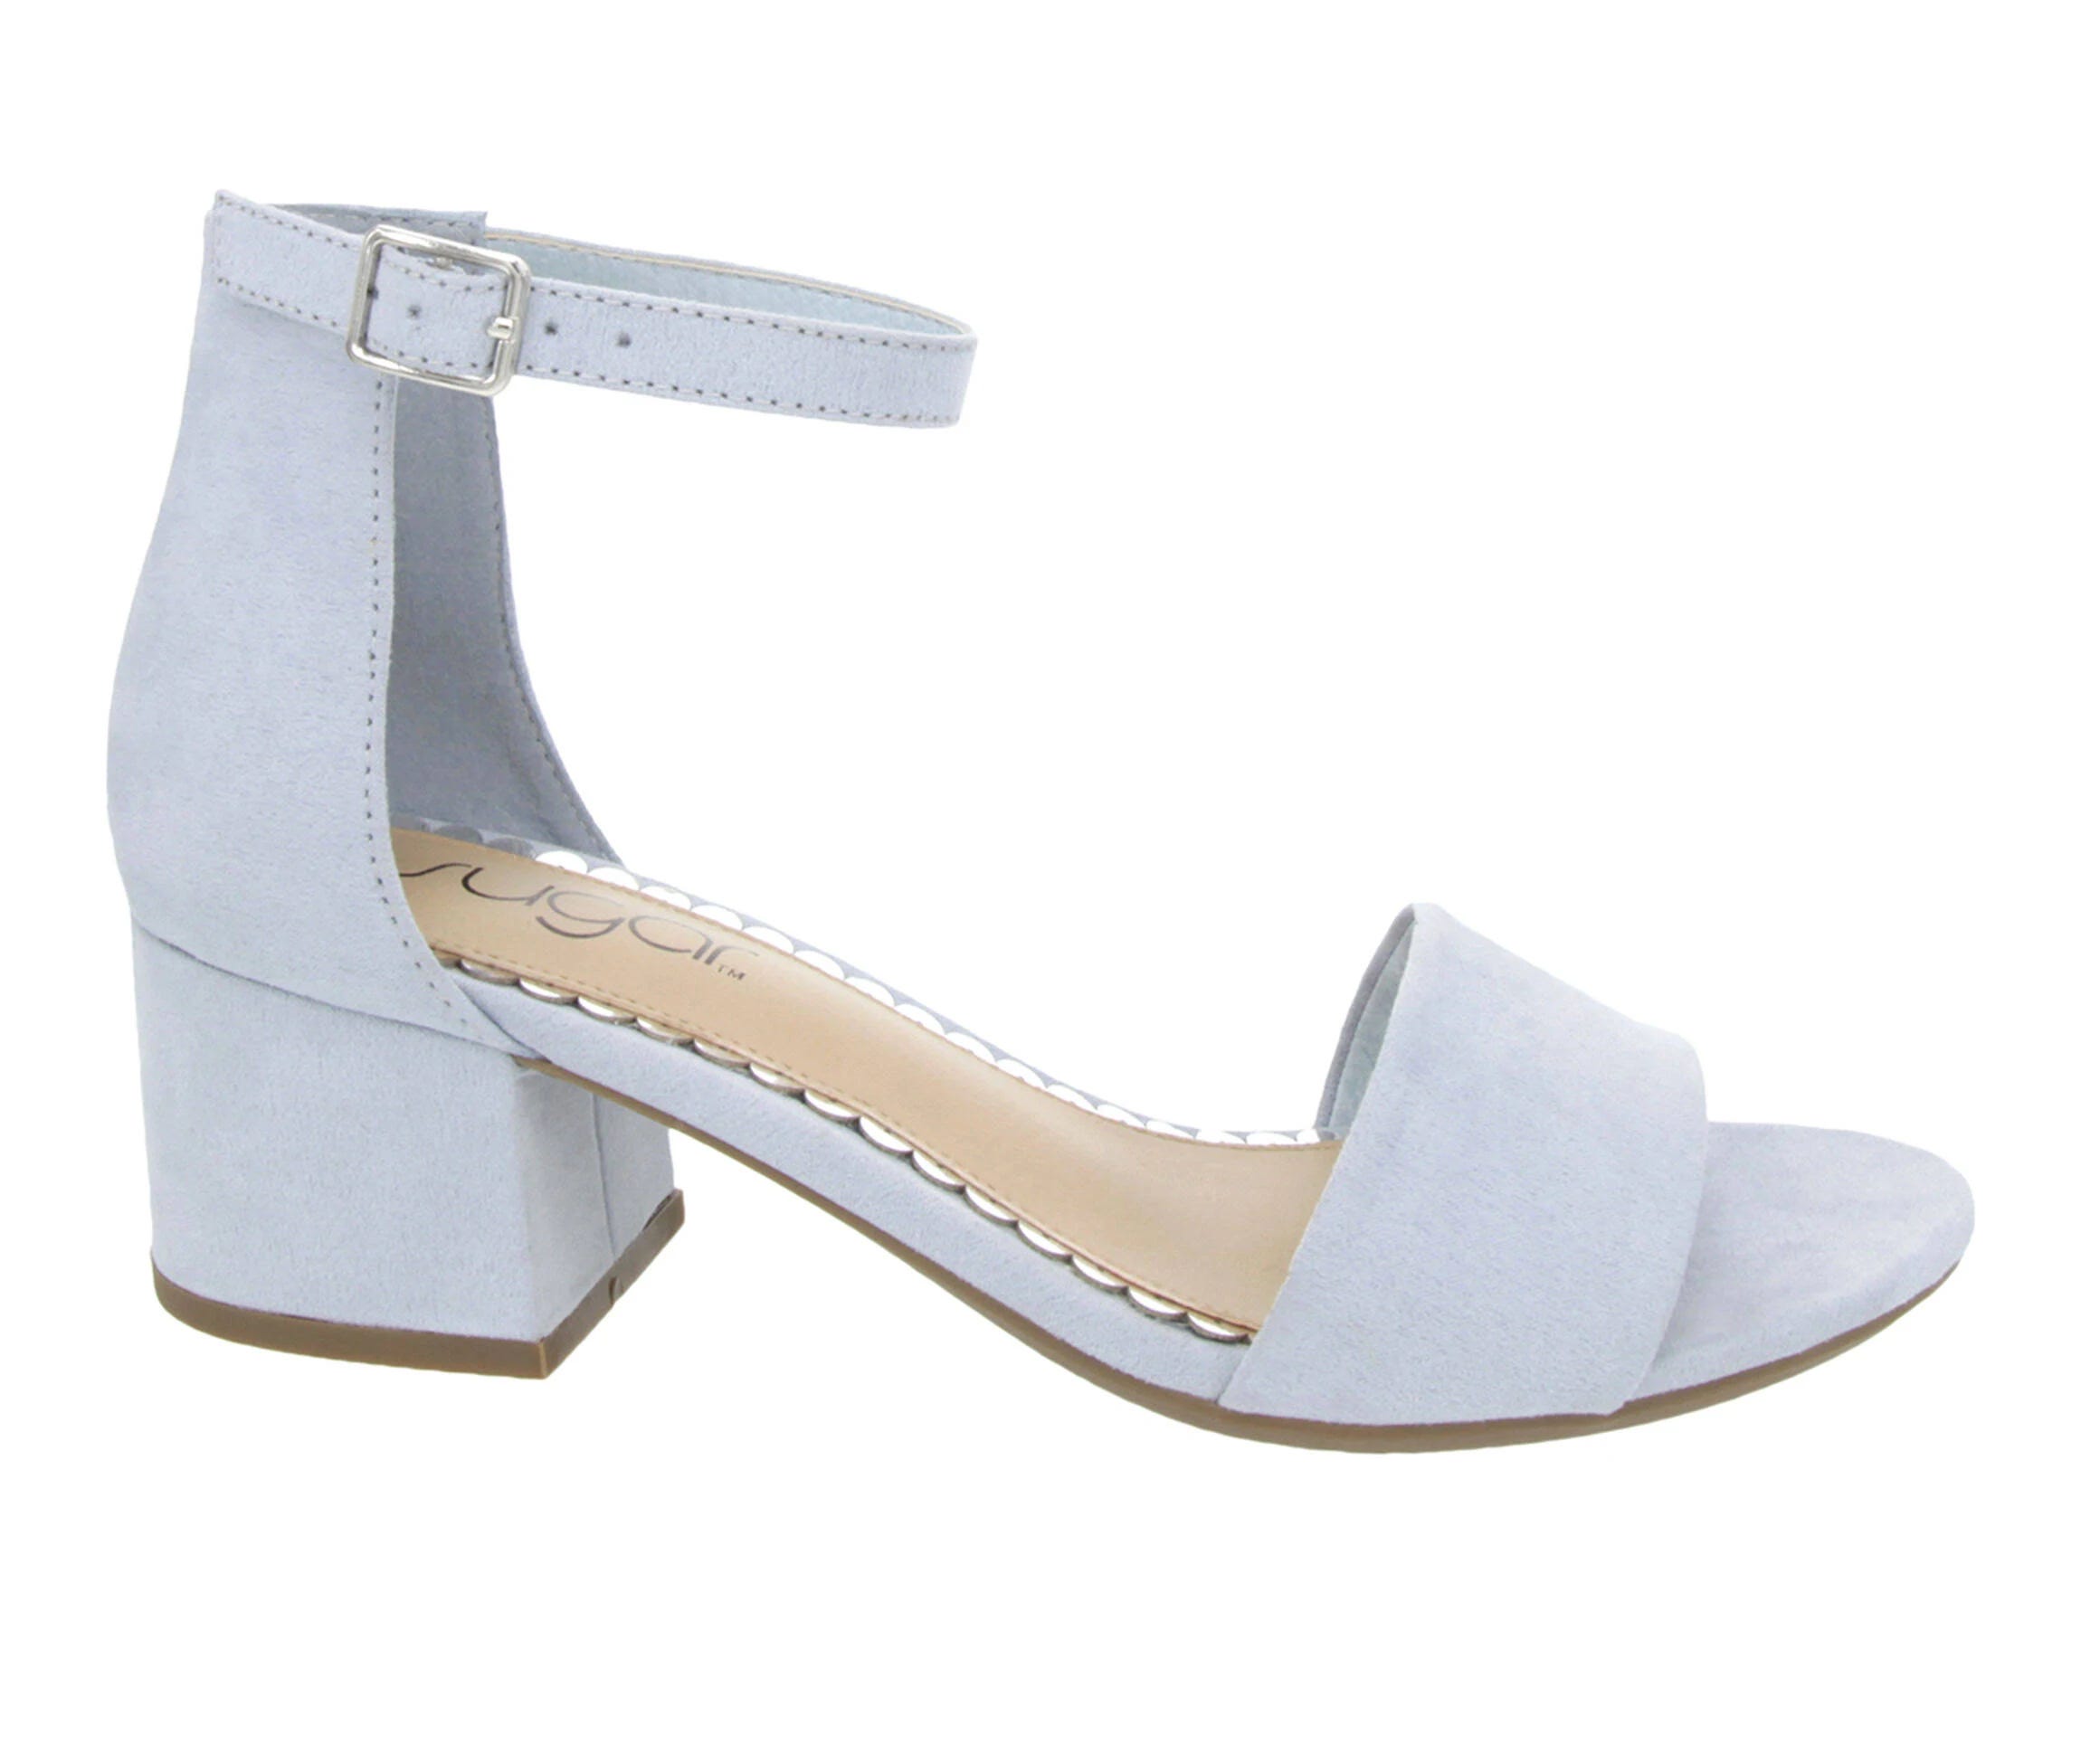 Sweet and Stylish Blue Buckle Low Heel Sandals | Image